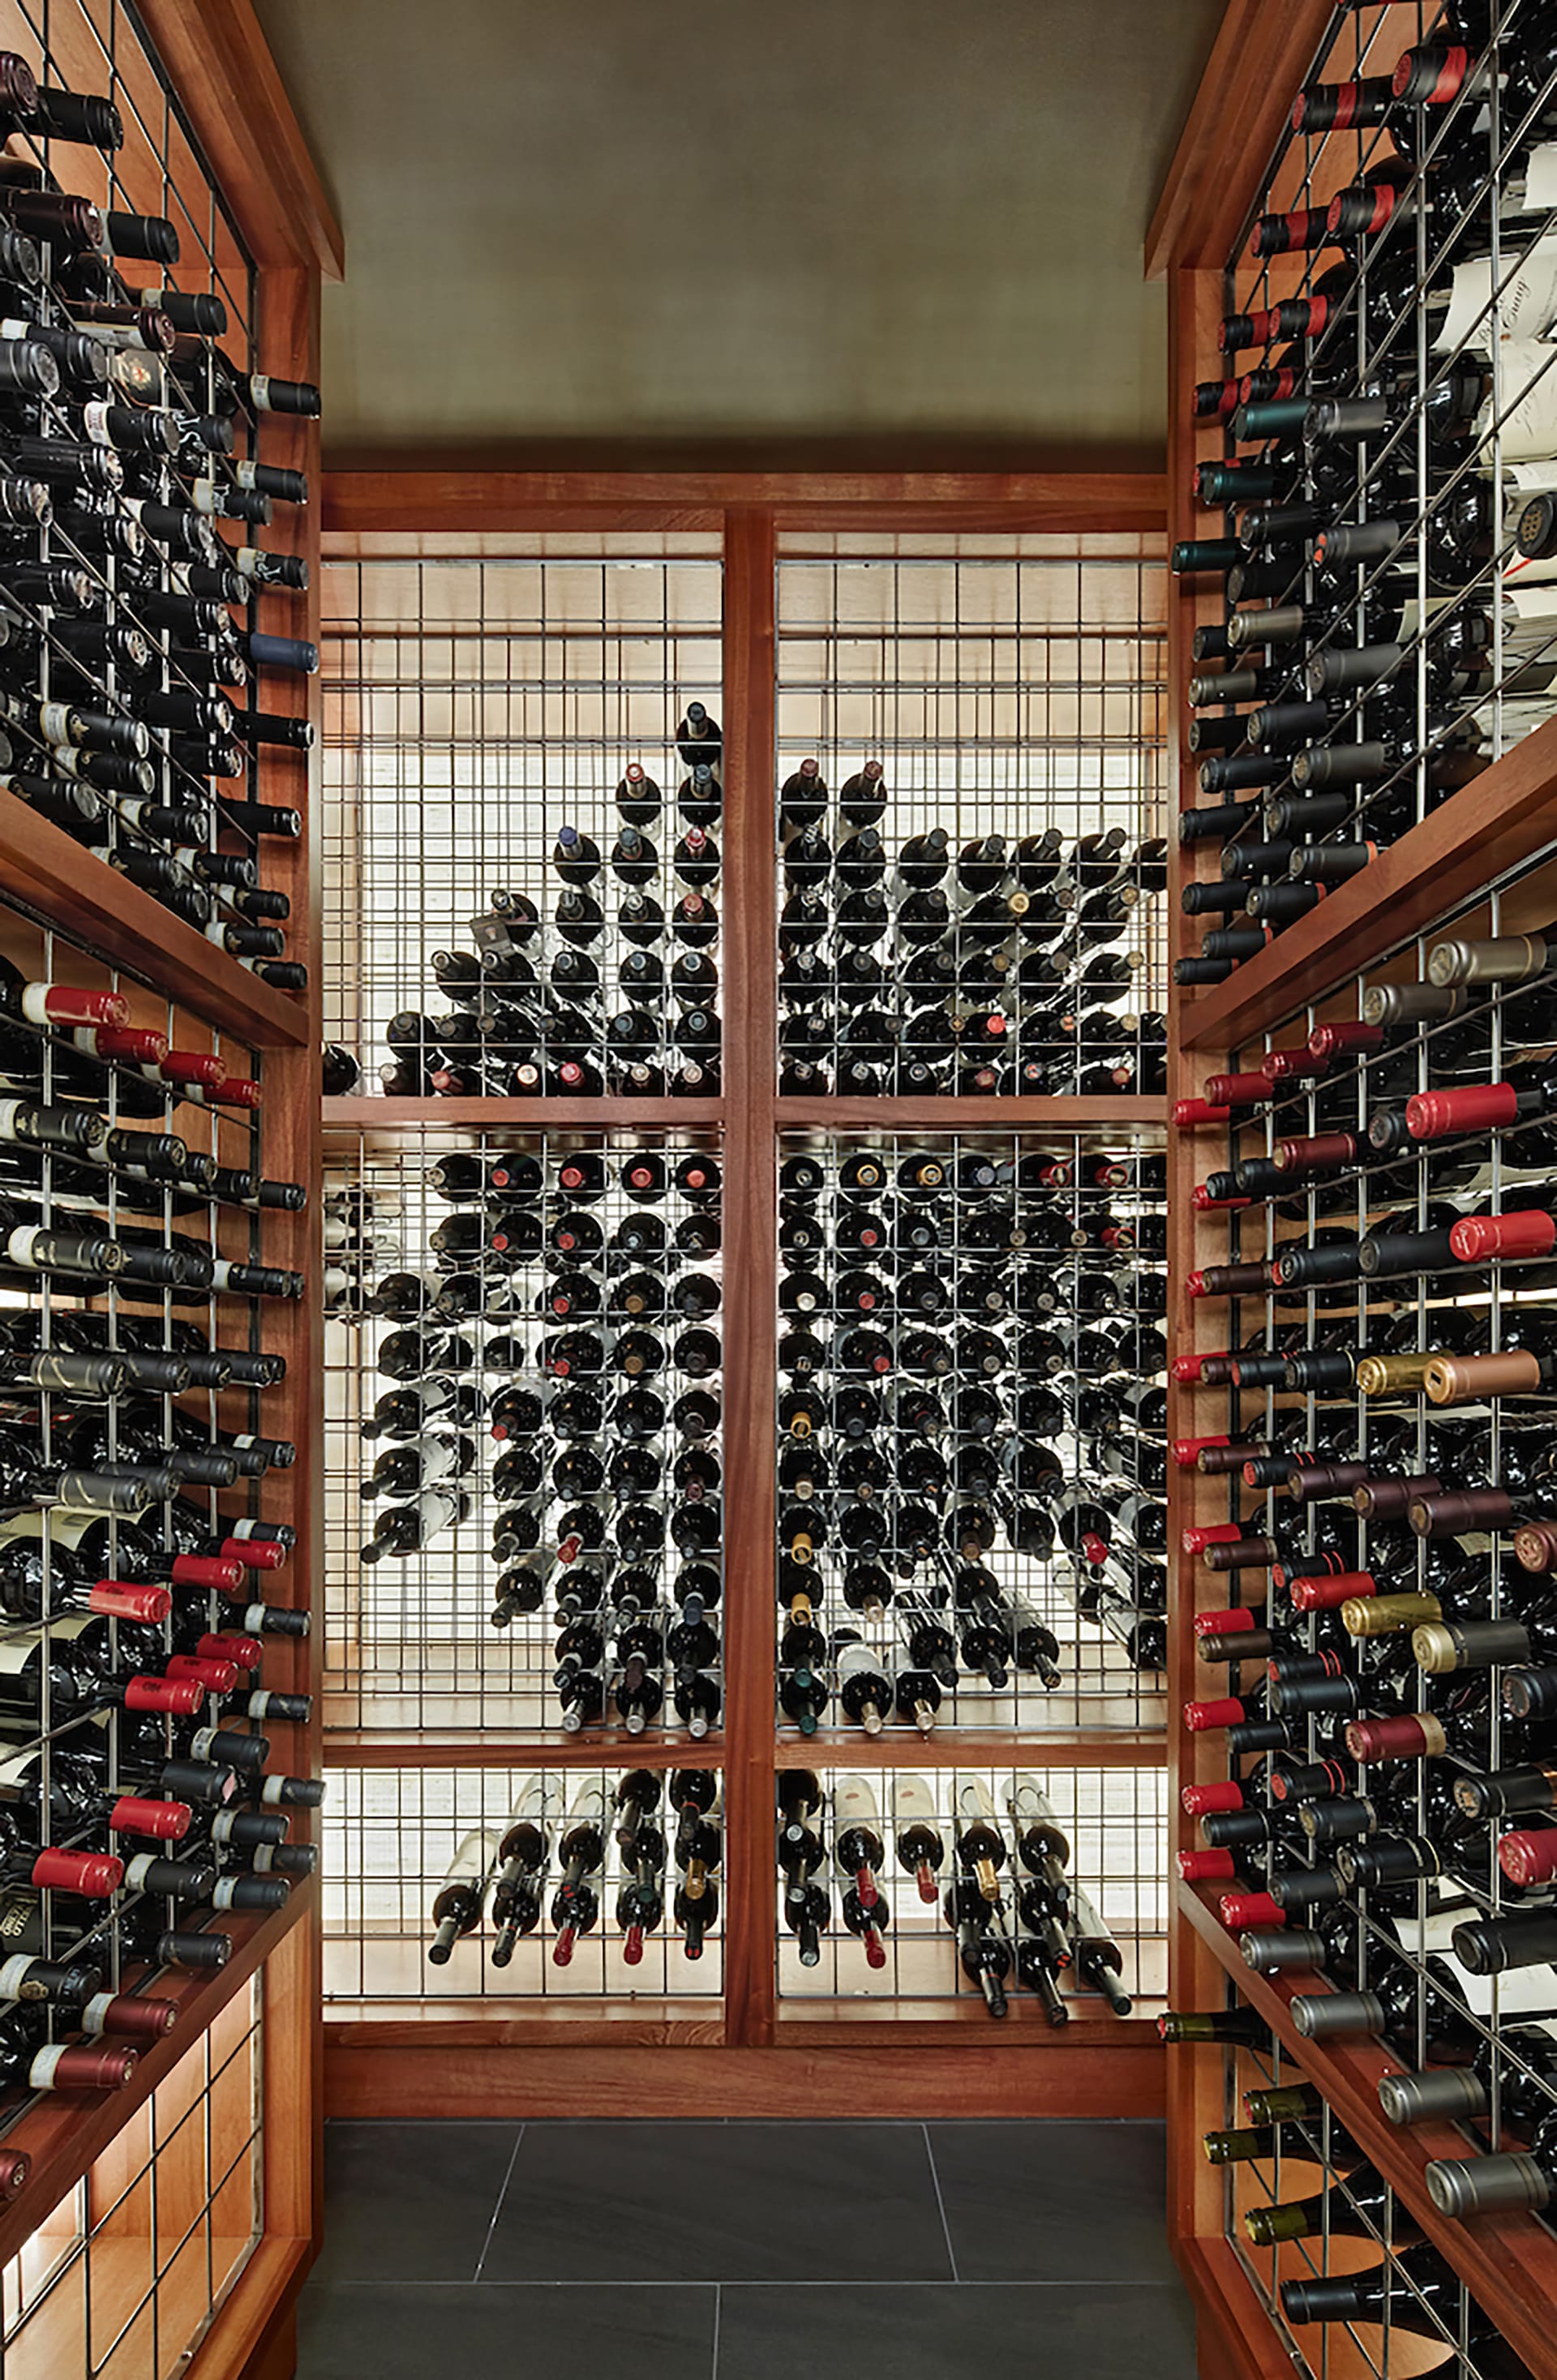 Wine cellar with green ceiling, wood framed storage, and a wire system to store bottles of wine.